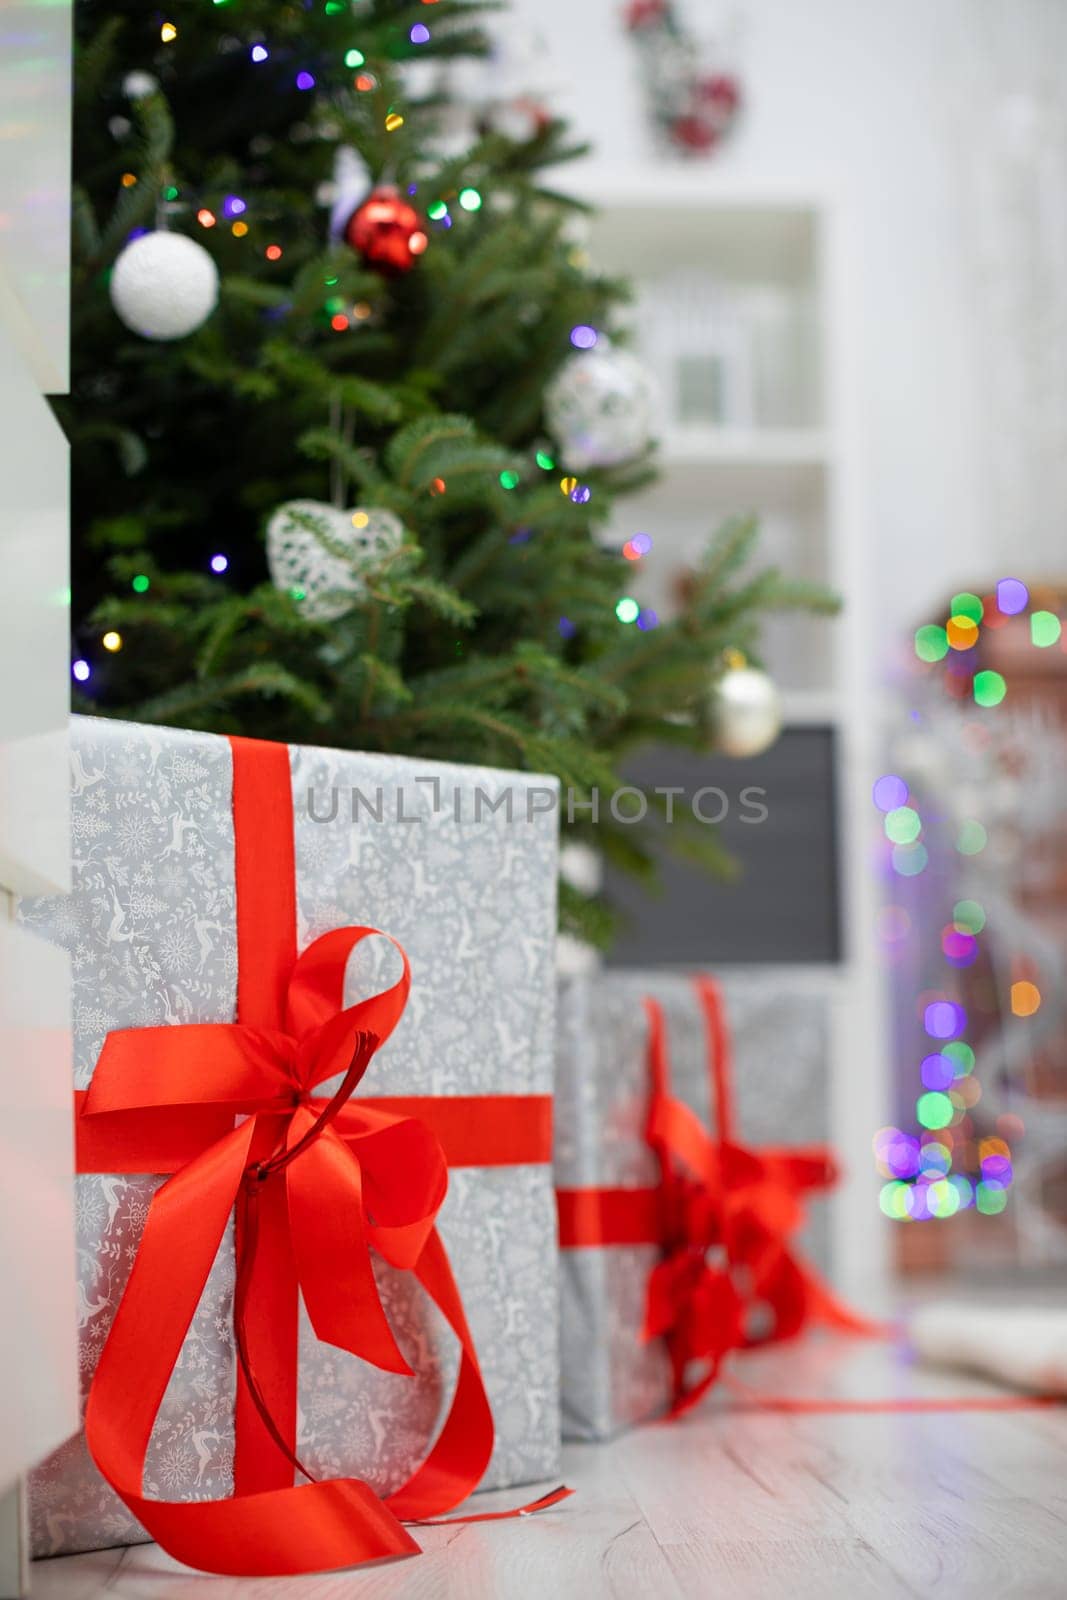 Silver gifts with red ribbons under Christmas tree. by fotodrobik